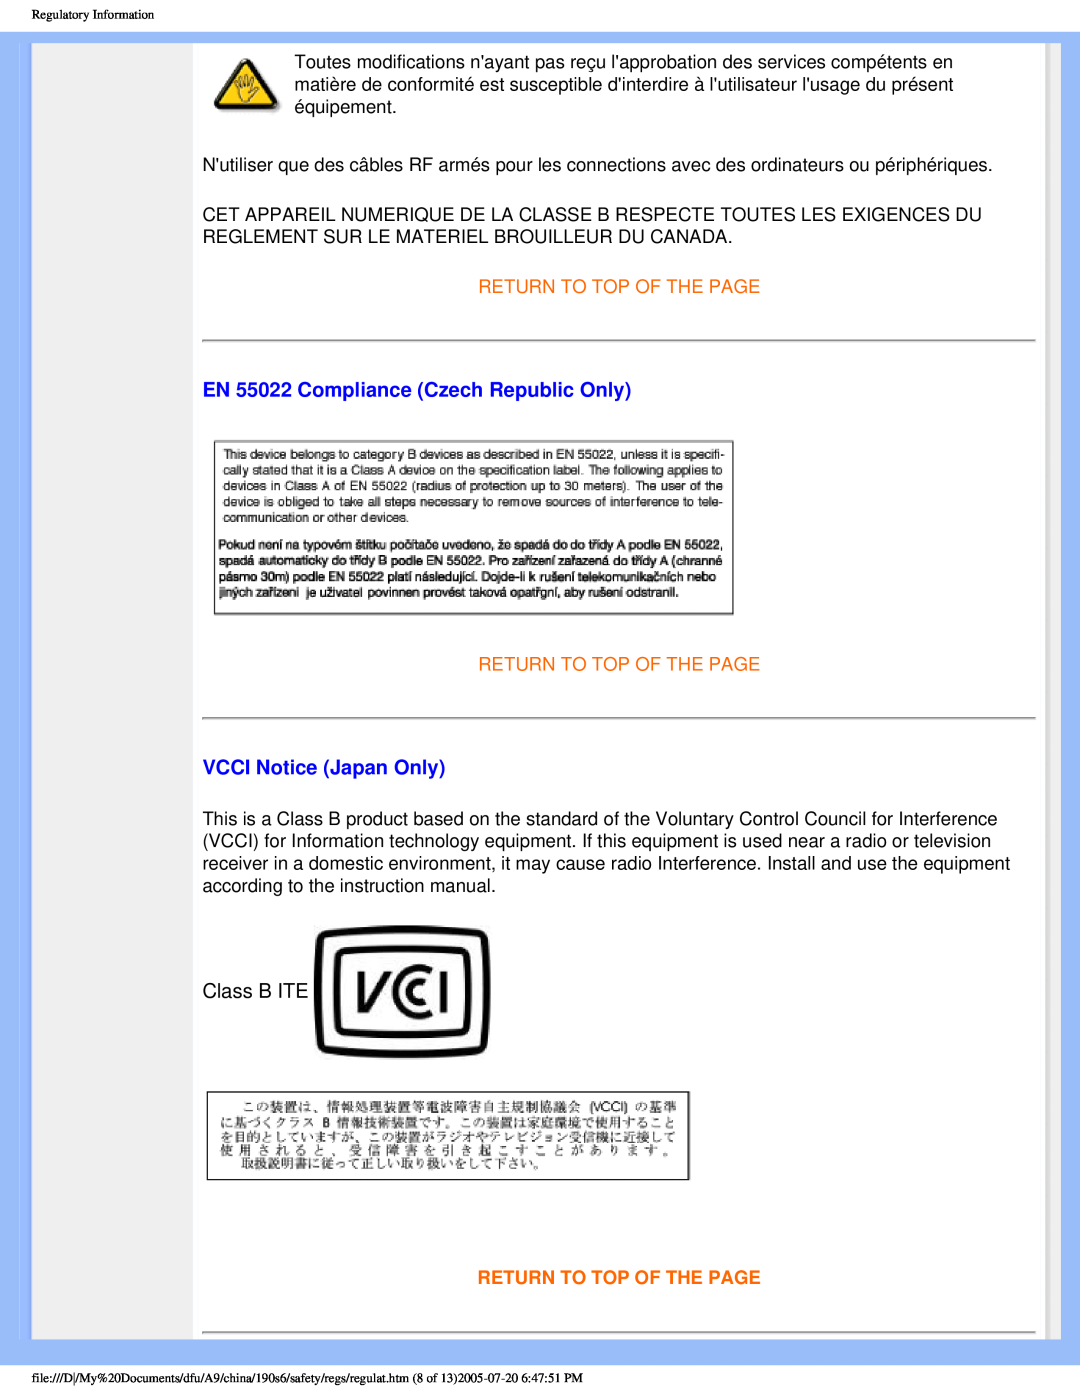 Philips 190P6 user manual EN 55022 Compliance Czech Republic Only, VCCI Notice Japan Only, Return To Top Of The Page 